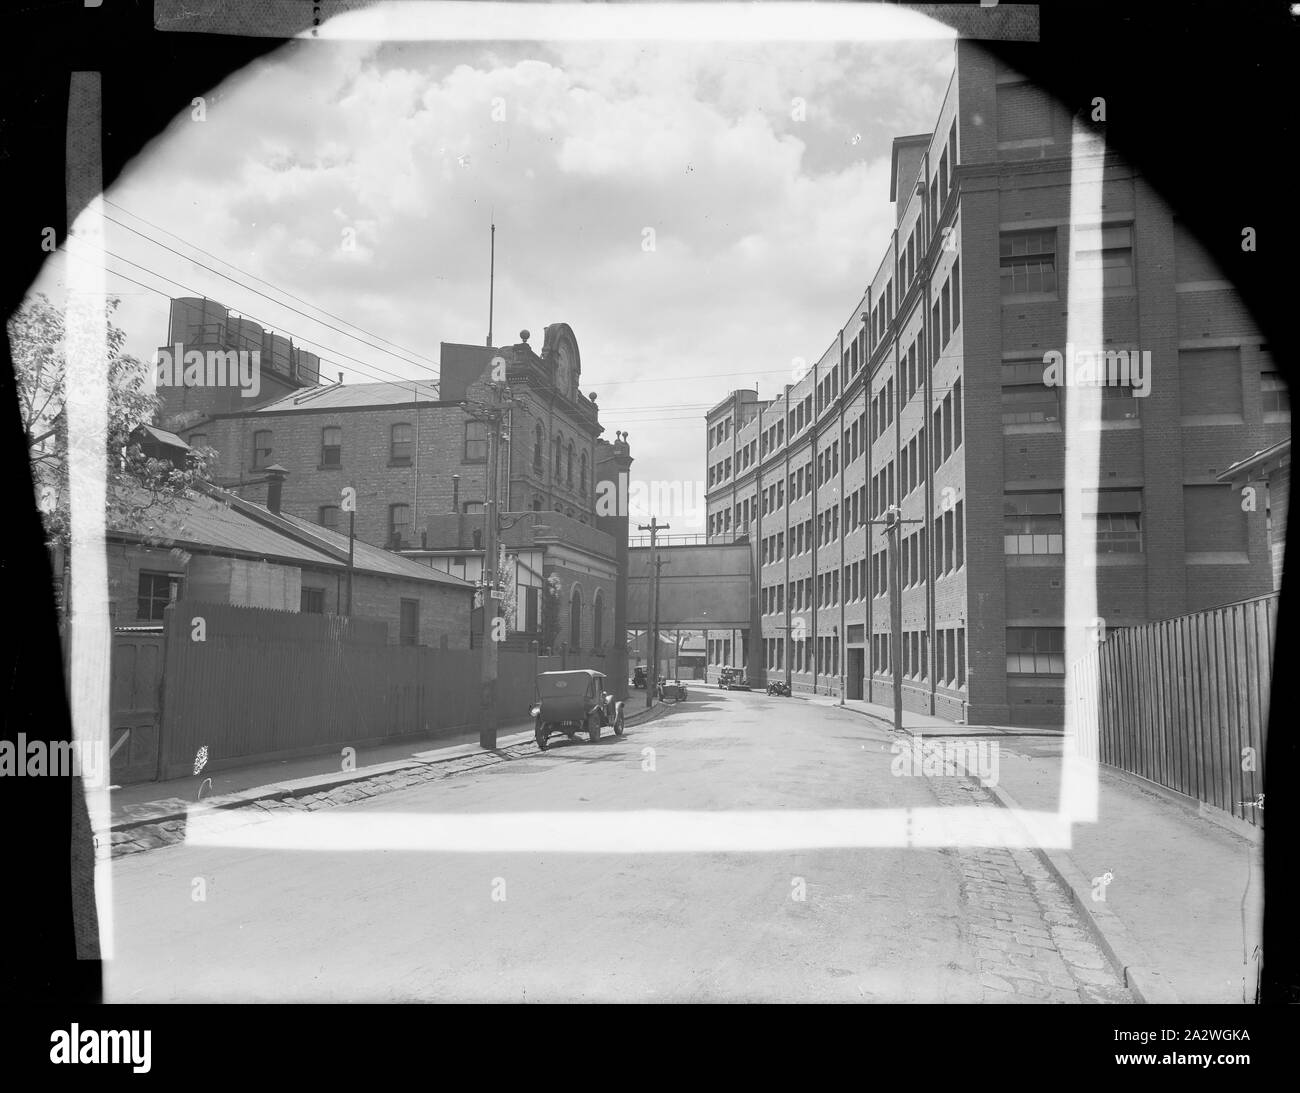 Glass Negative, Kodak Factory Along Southampton Cres, Abbotsford, Victoria, circa 1930s, Black and white glass plate negative of the view along Southampton Crescent, Abbotsford, showing the exterior of the Kodak Australasia factory buildings in the 1930s. There is perforated white tape applied to the non-emulsion side of the image as a mask, indicating the position of a print. Yarra Grange was originally the home of Thomas Baker. In 1884 he established the Austral Plate Company on Stock Photo